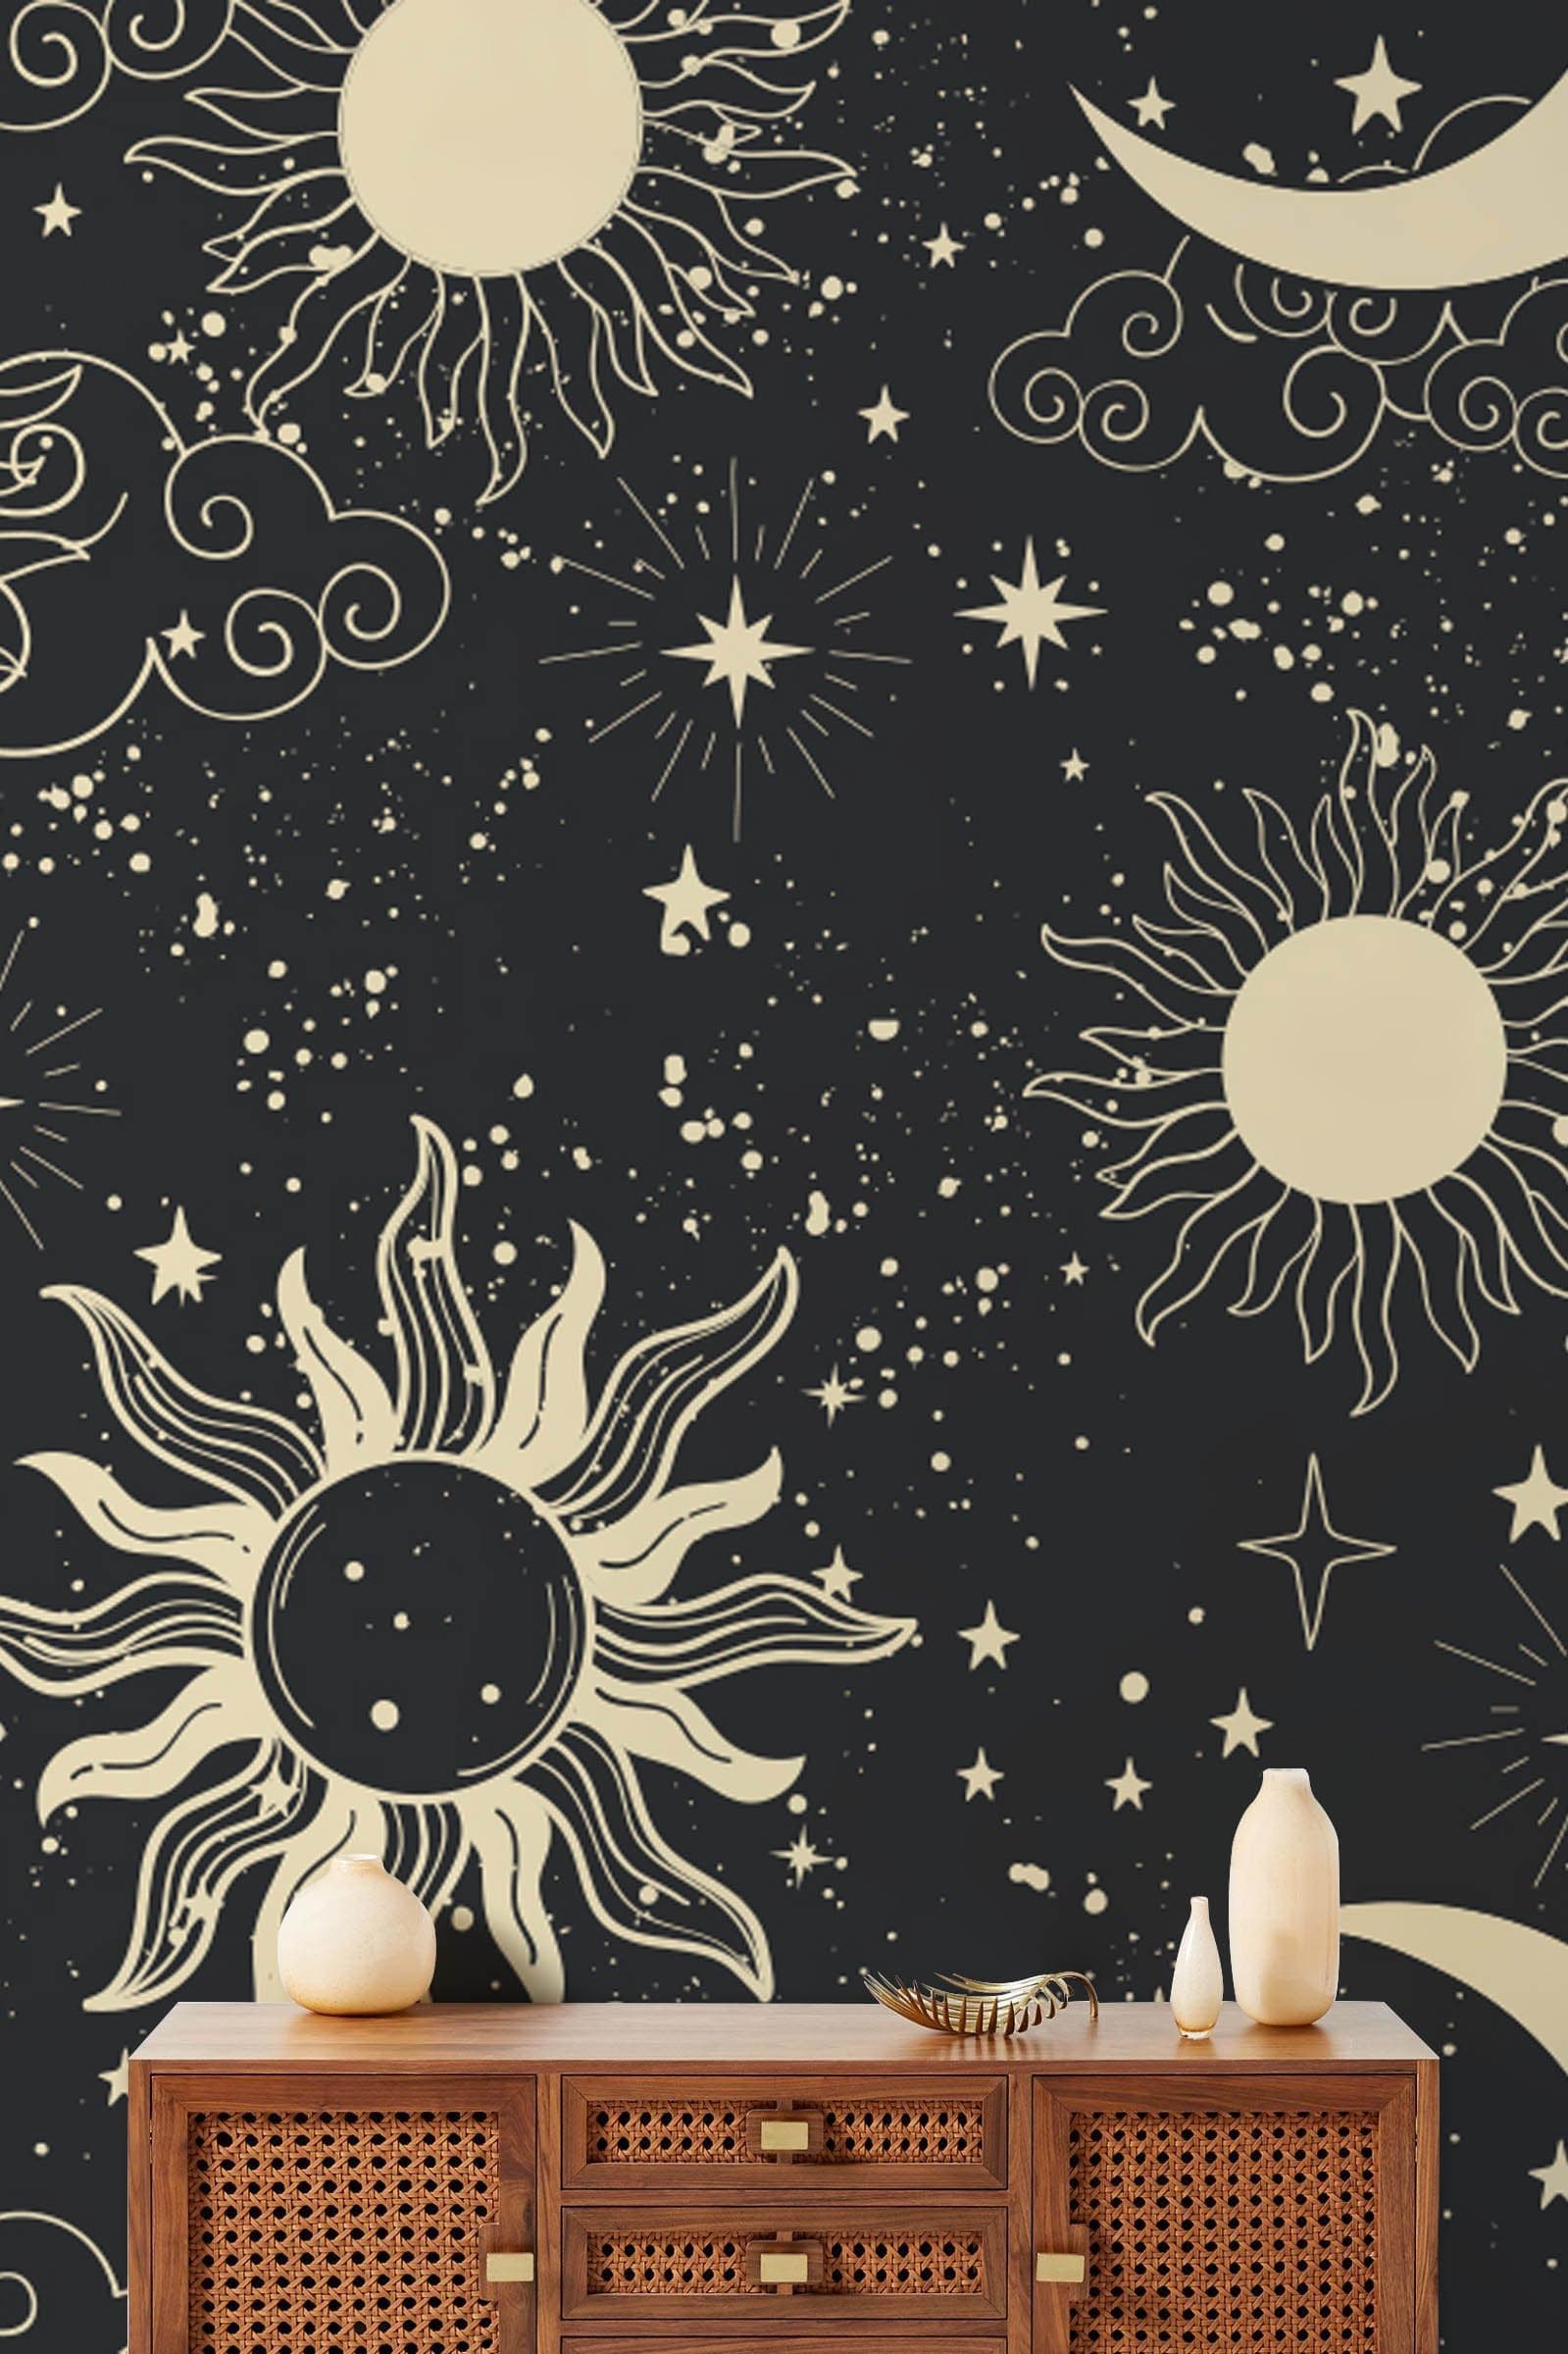 Wallpaper mural for the hallway that features a dark space scene with solar planets.